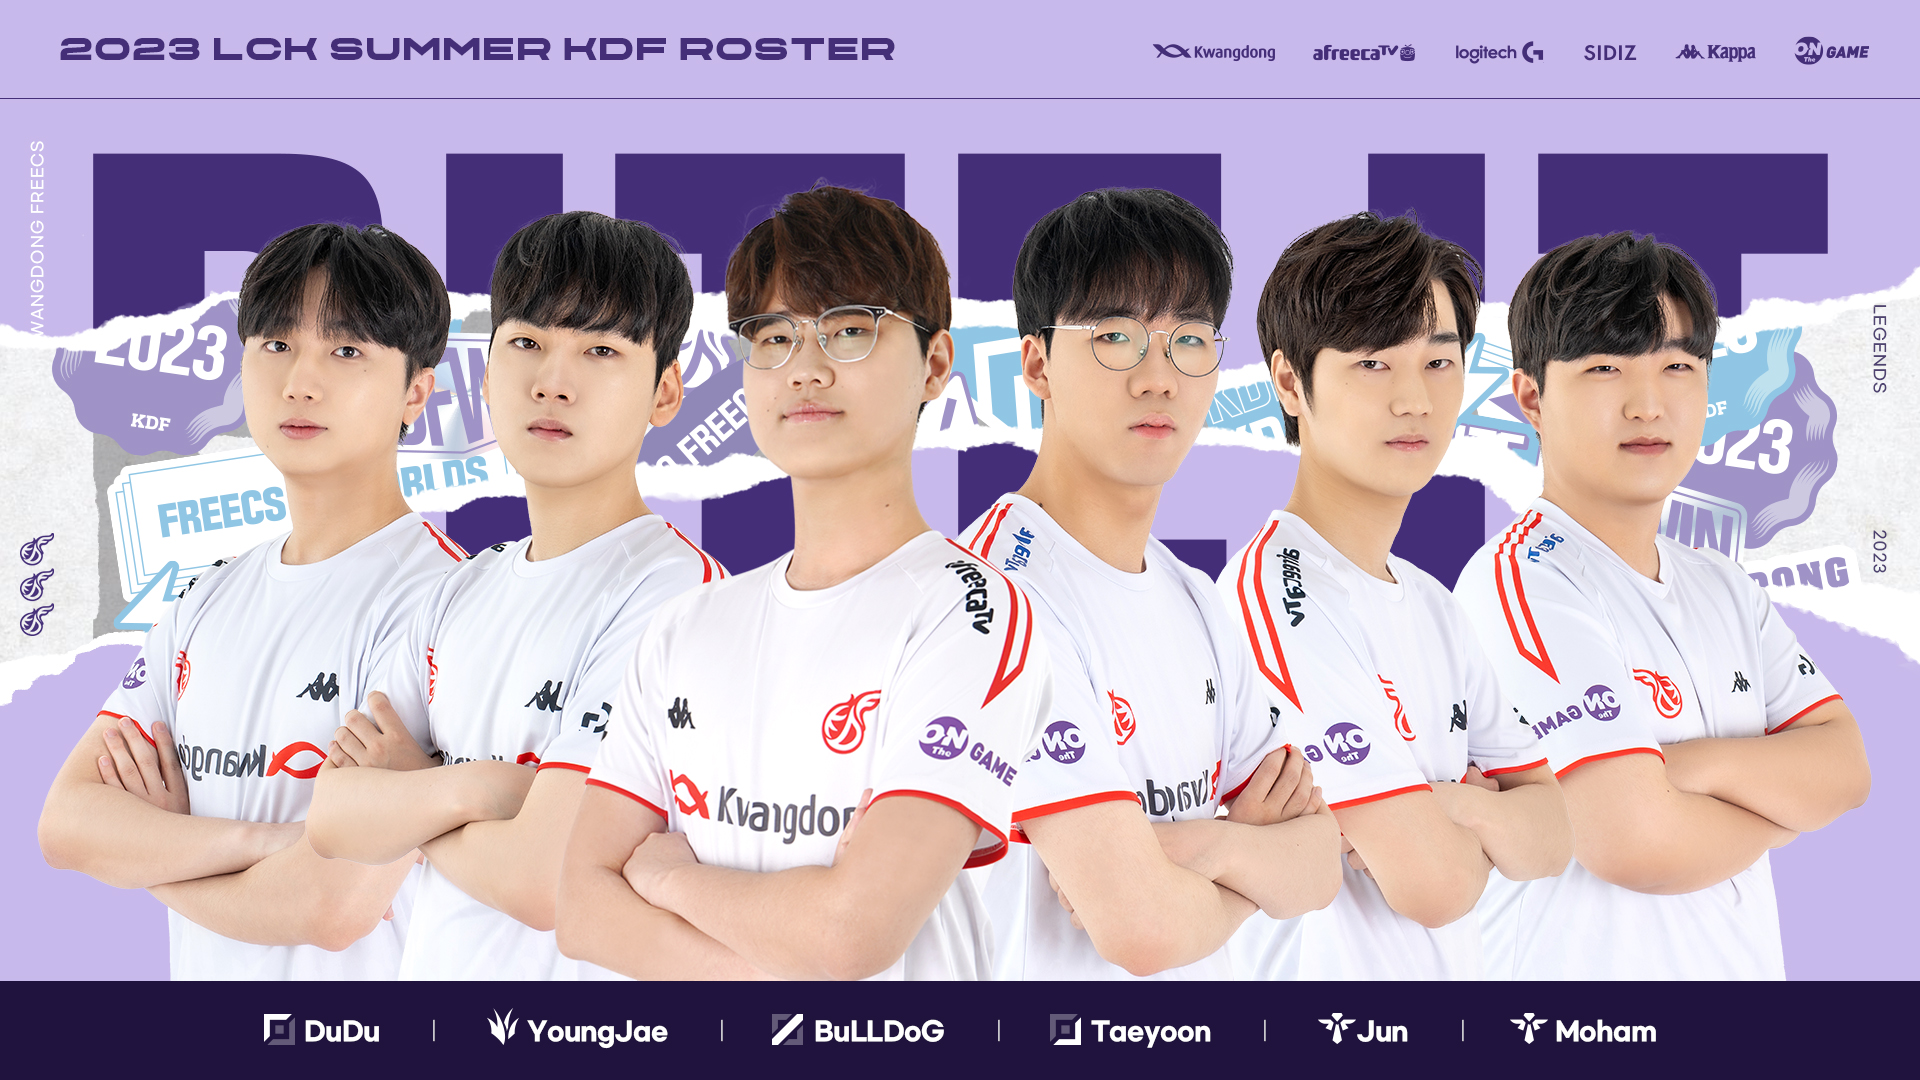 AF announces that Teddy, Ellim, FATE, and Hoit have joined their 2022  roster - Inven Global